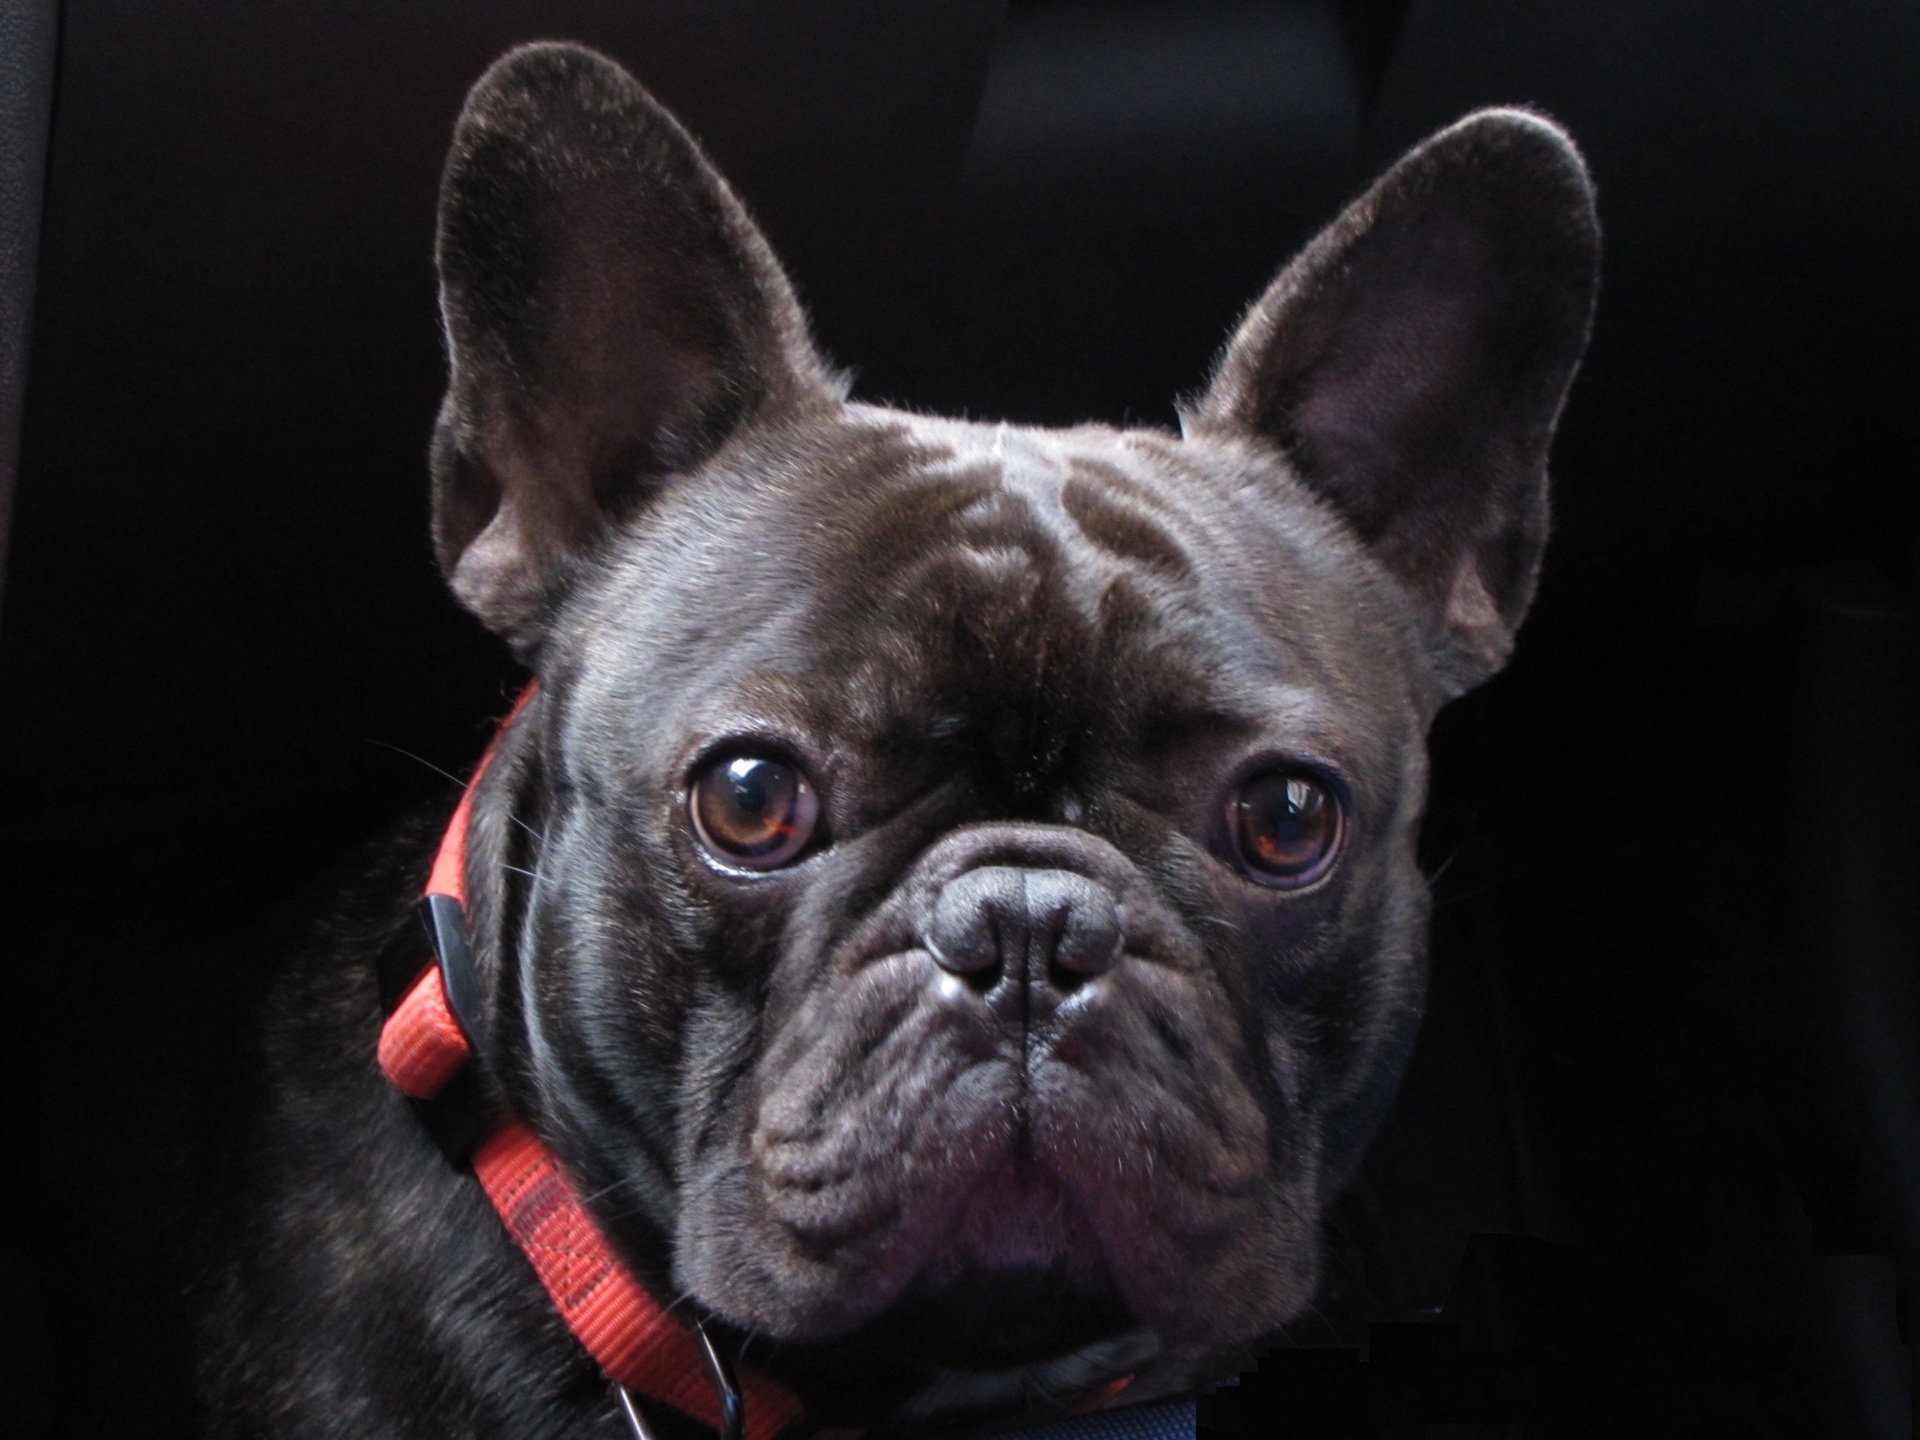 free pictures of french bulldogs Bulldog french dog frenchie bulldogs ...